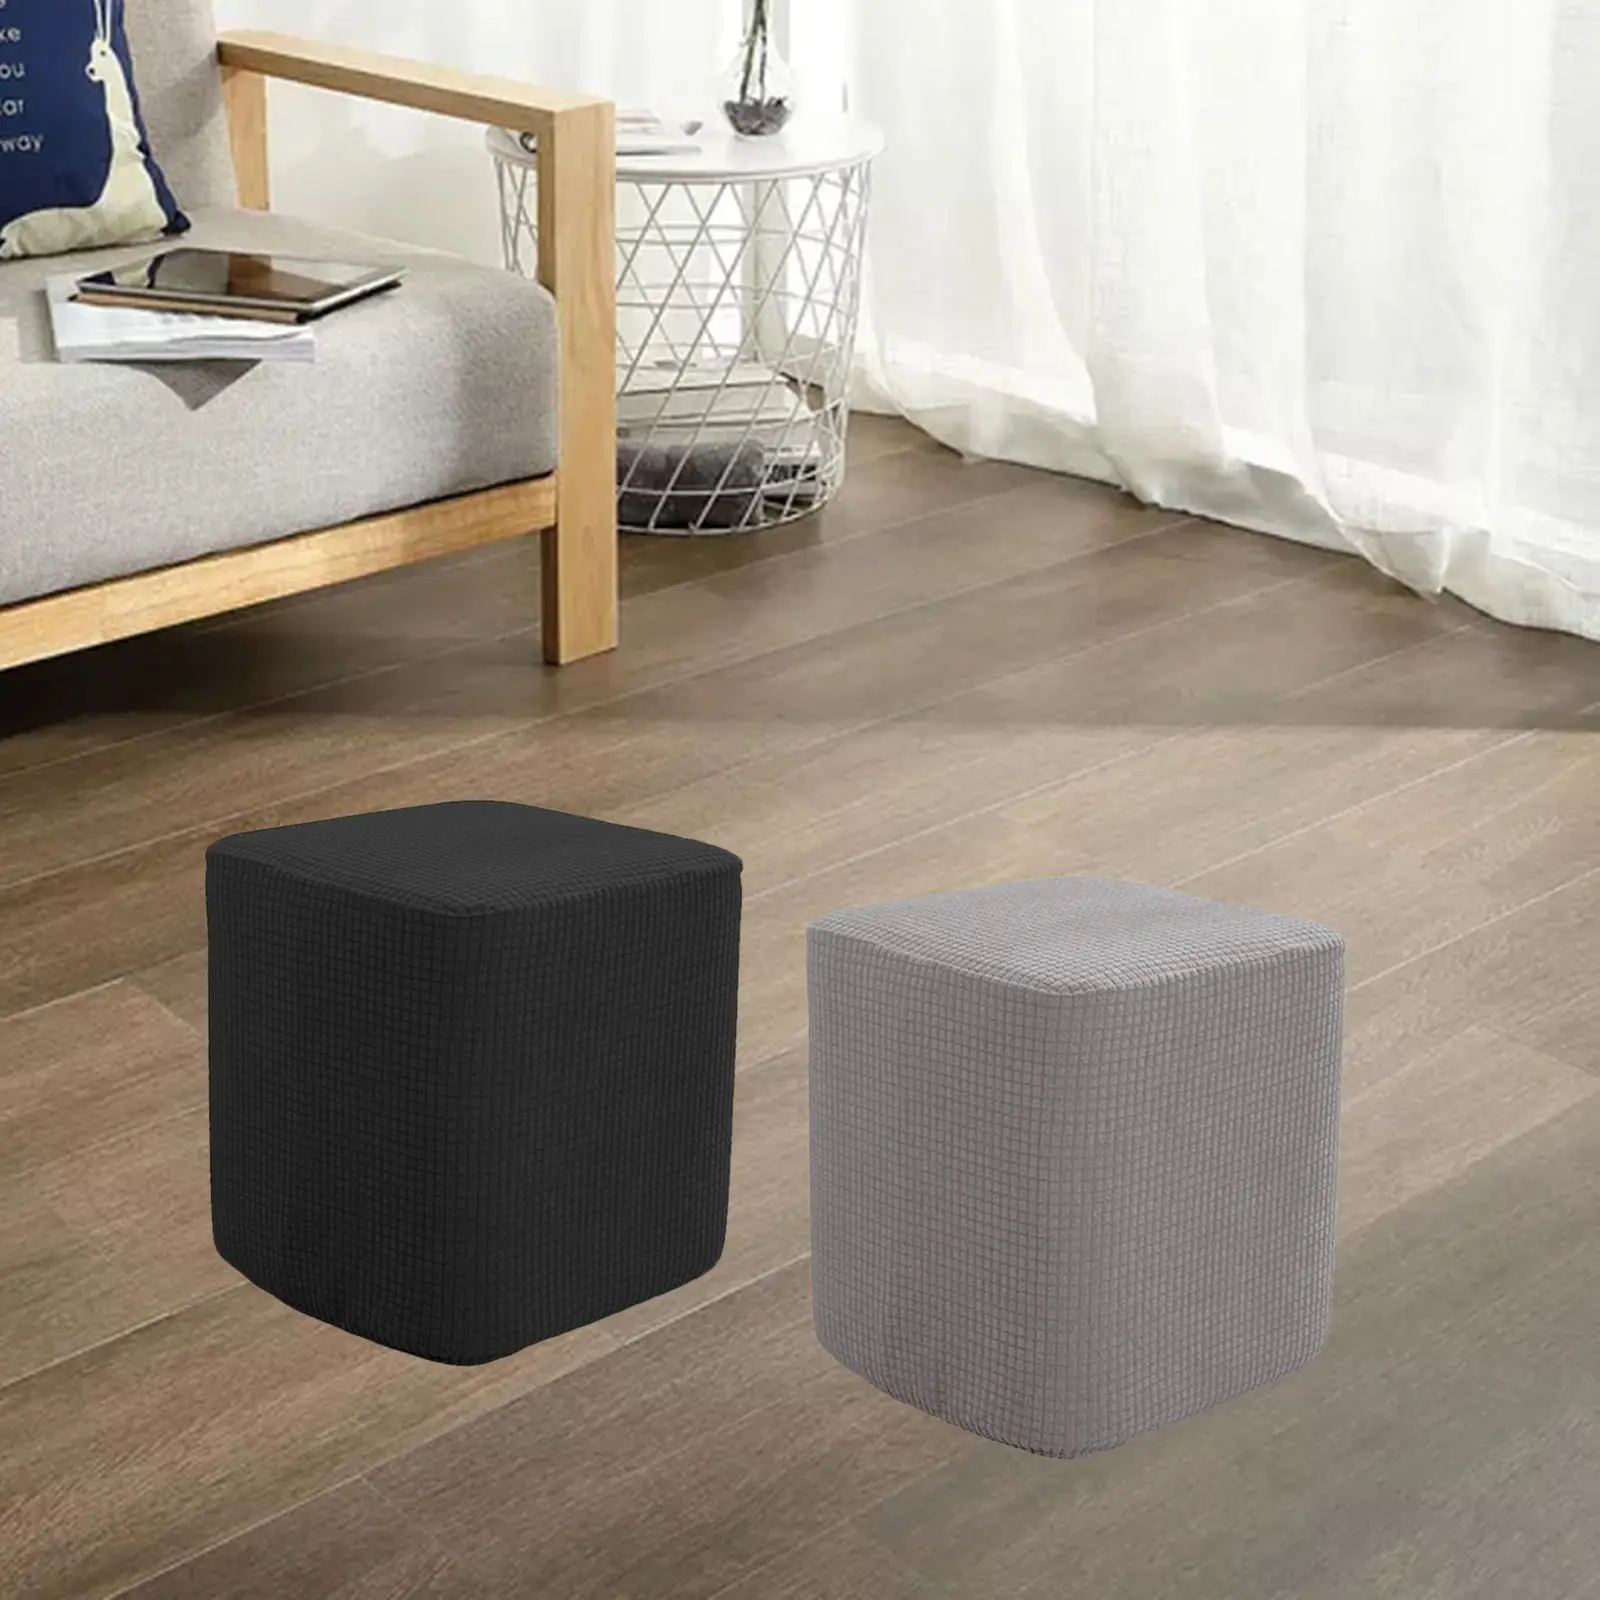 Two-part Square Footrest Ottoman Covers A Decorative Footstool Cover